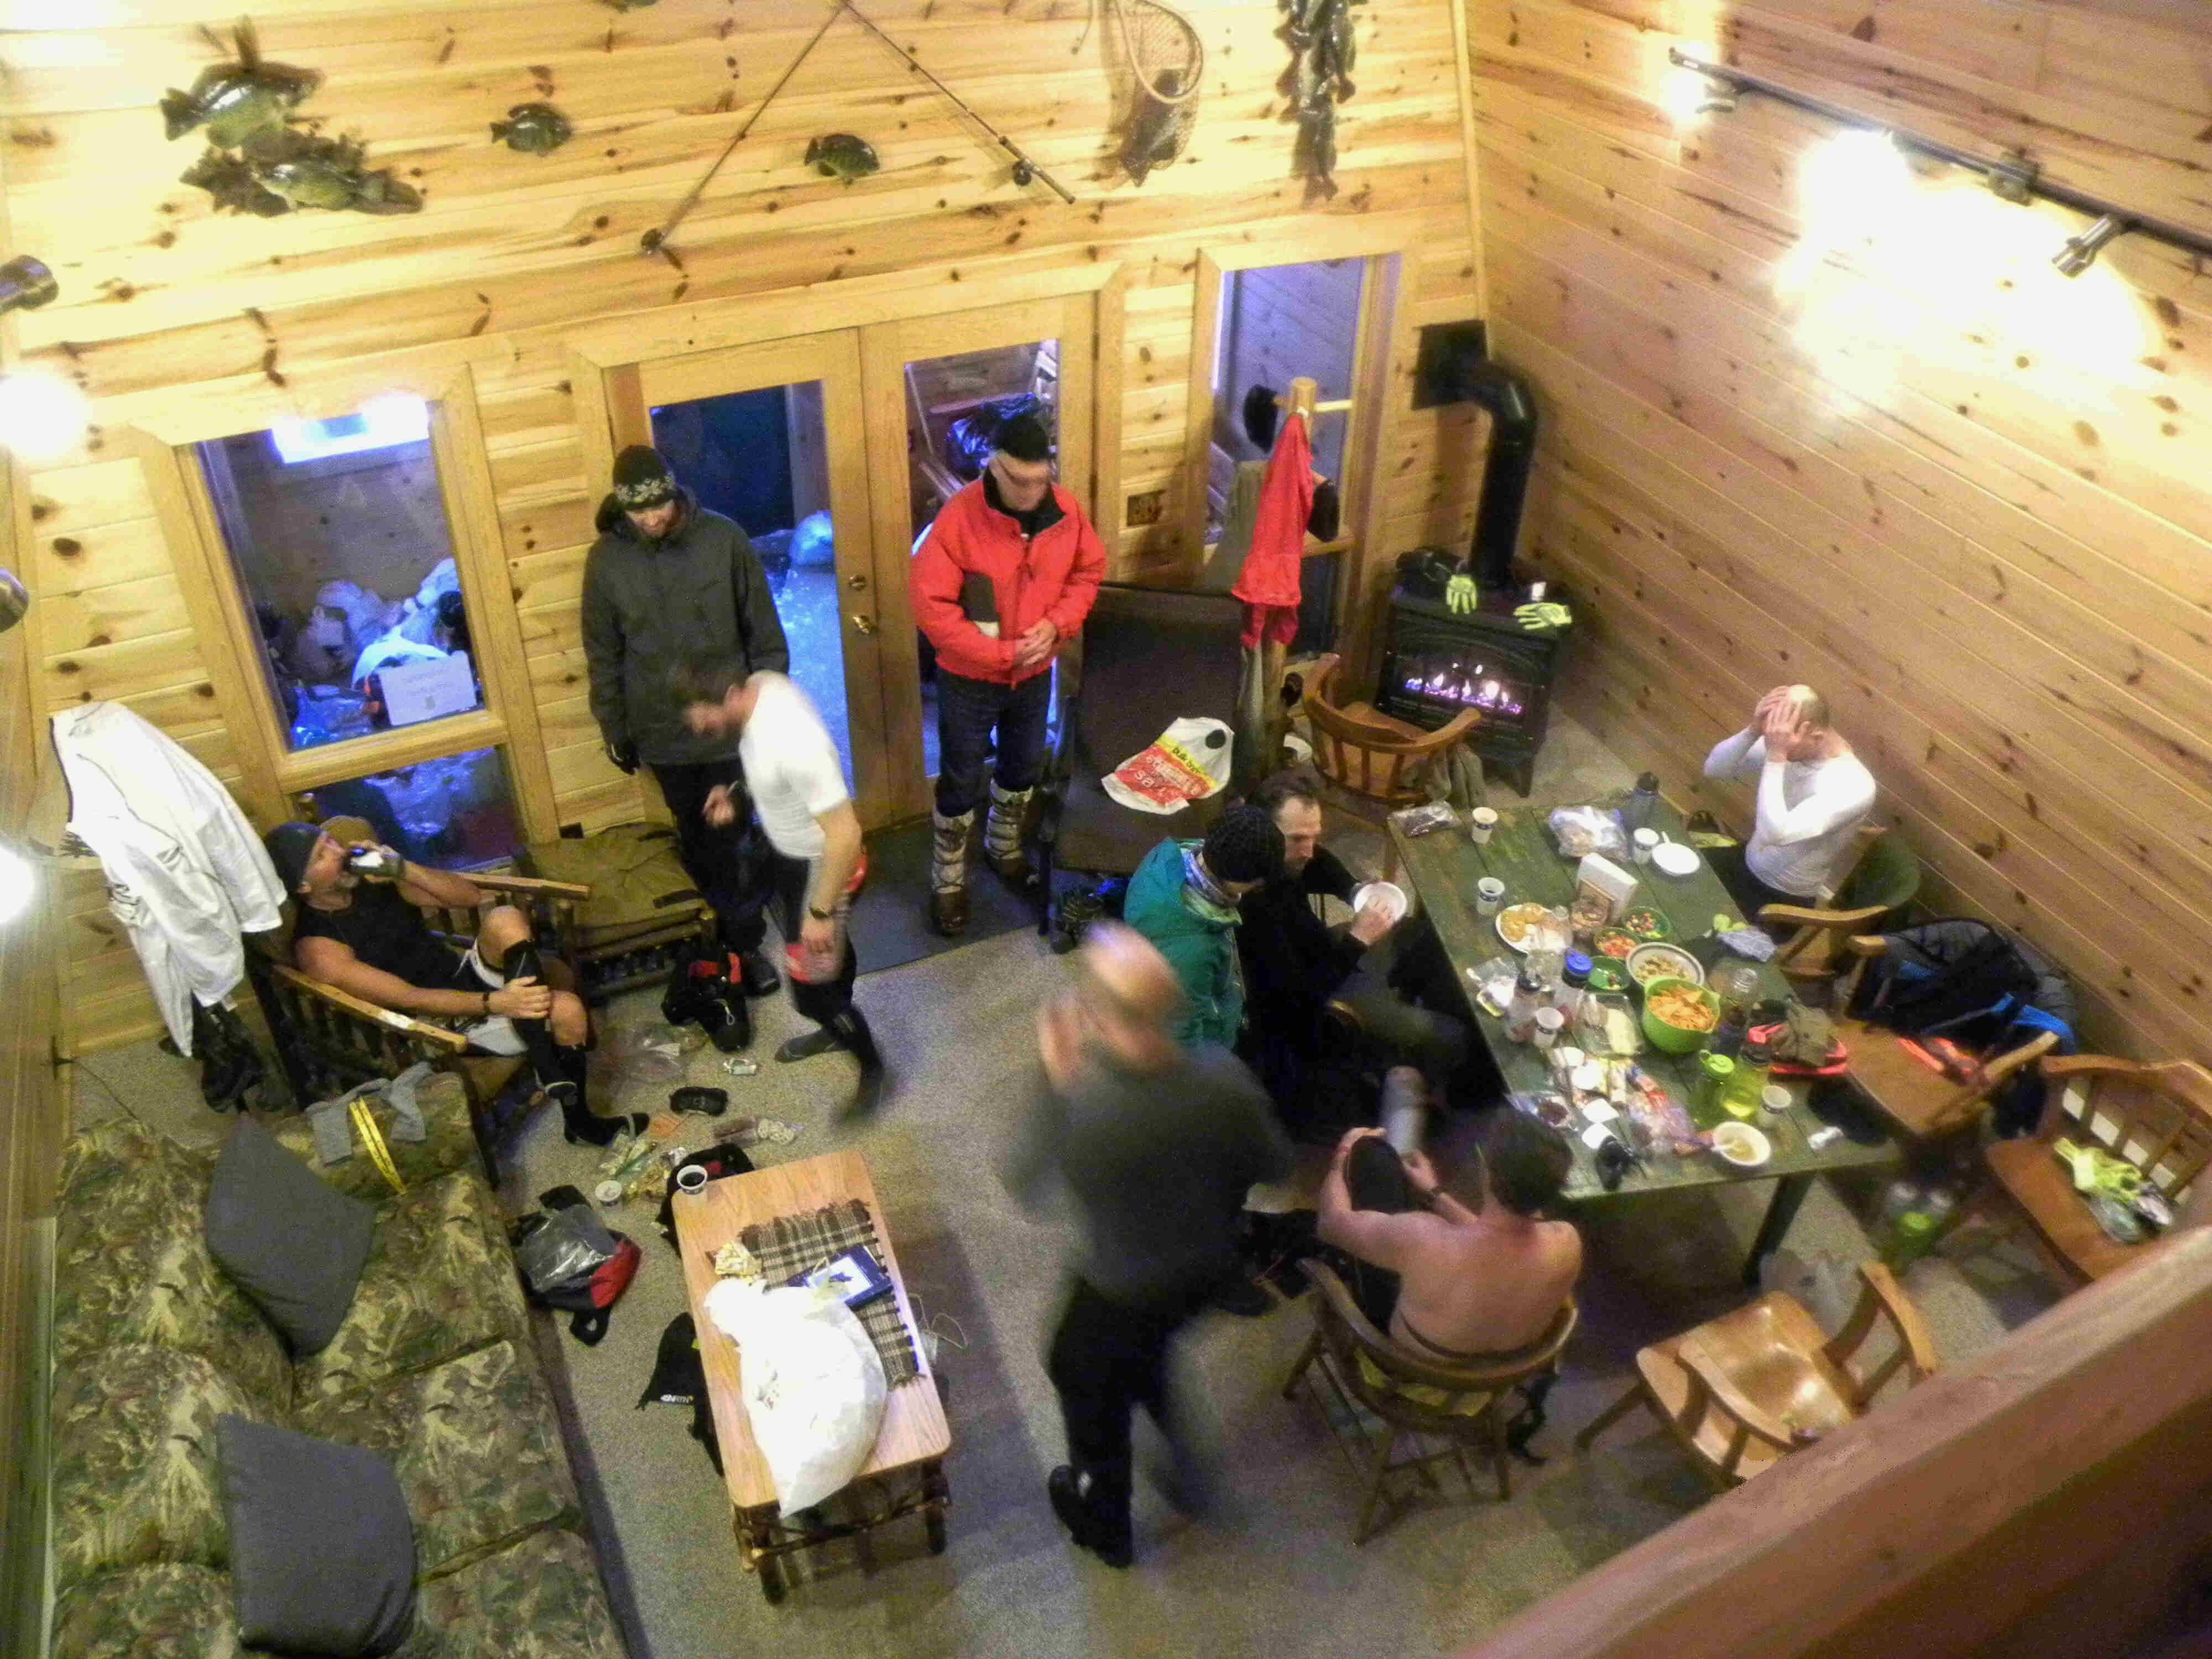 Downward view from a loft, looking down on a group of people gather inside a wood sided cabin room